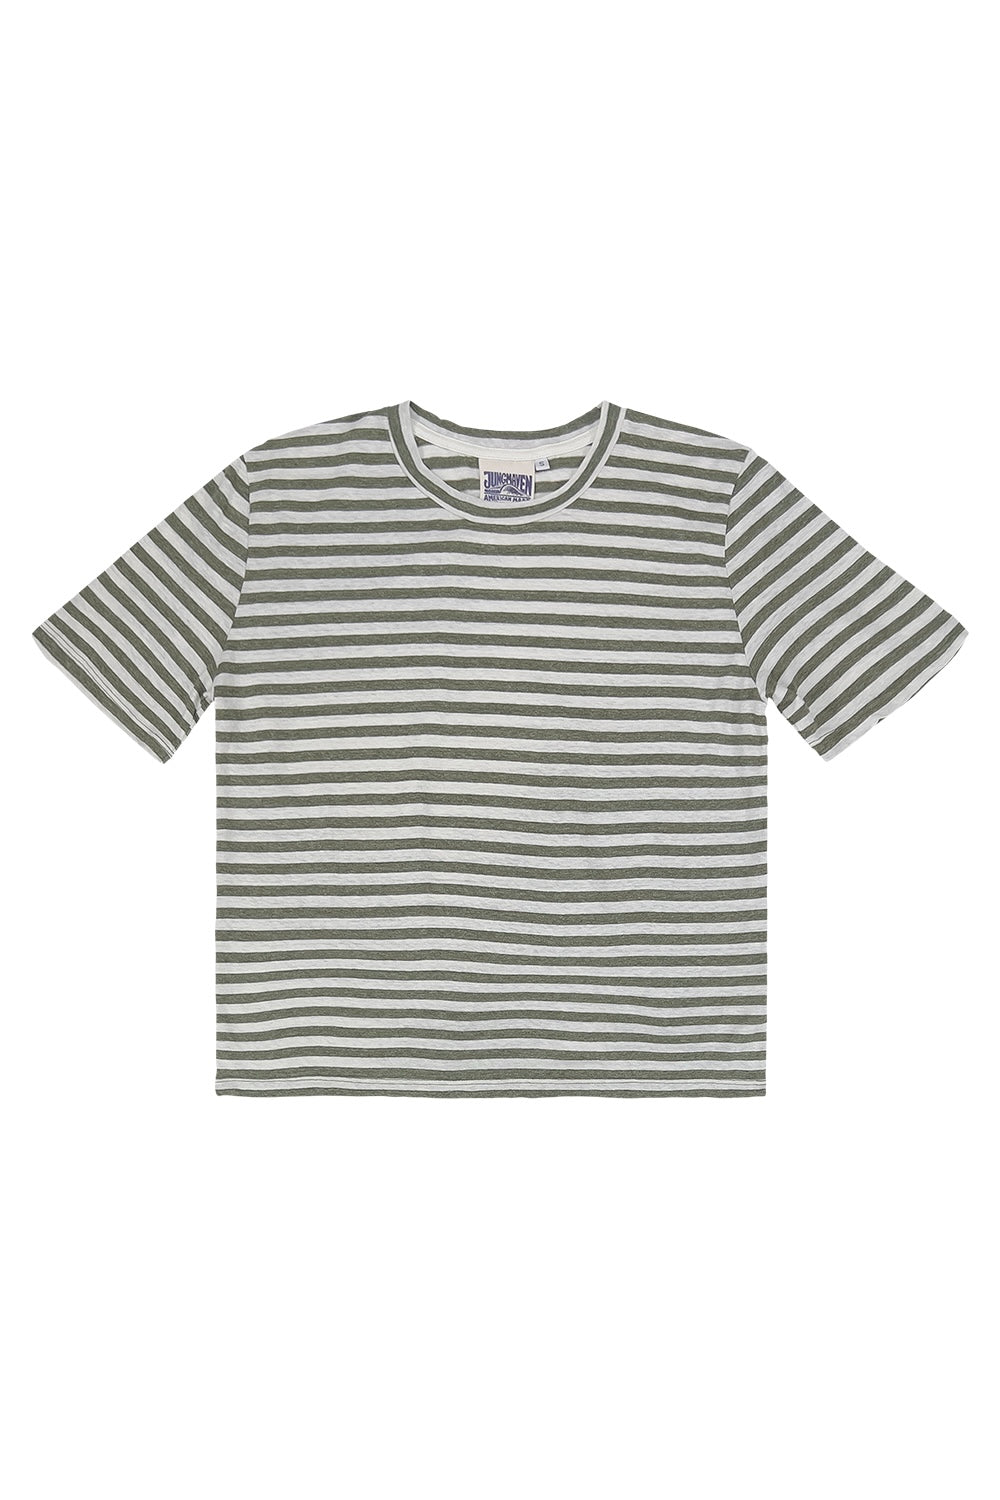 Stripe Silverlake Cropped Tee | Jungmaven Hemp Clothing & Accessories / Color:Olive/White Stripe